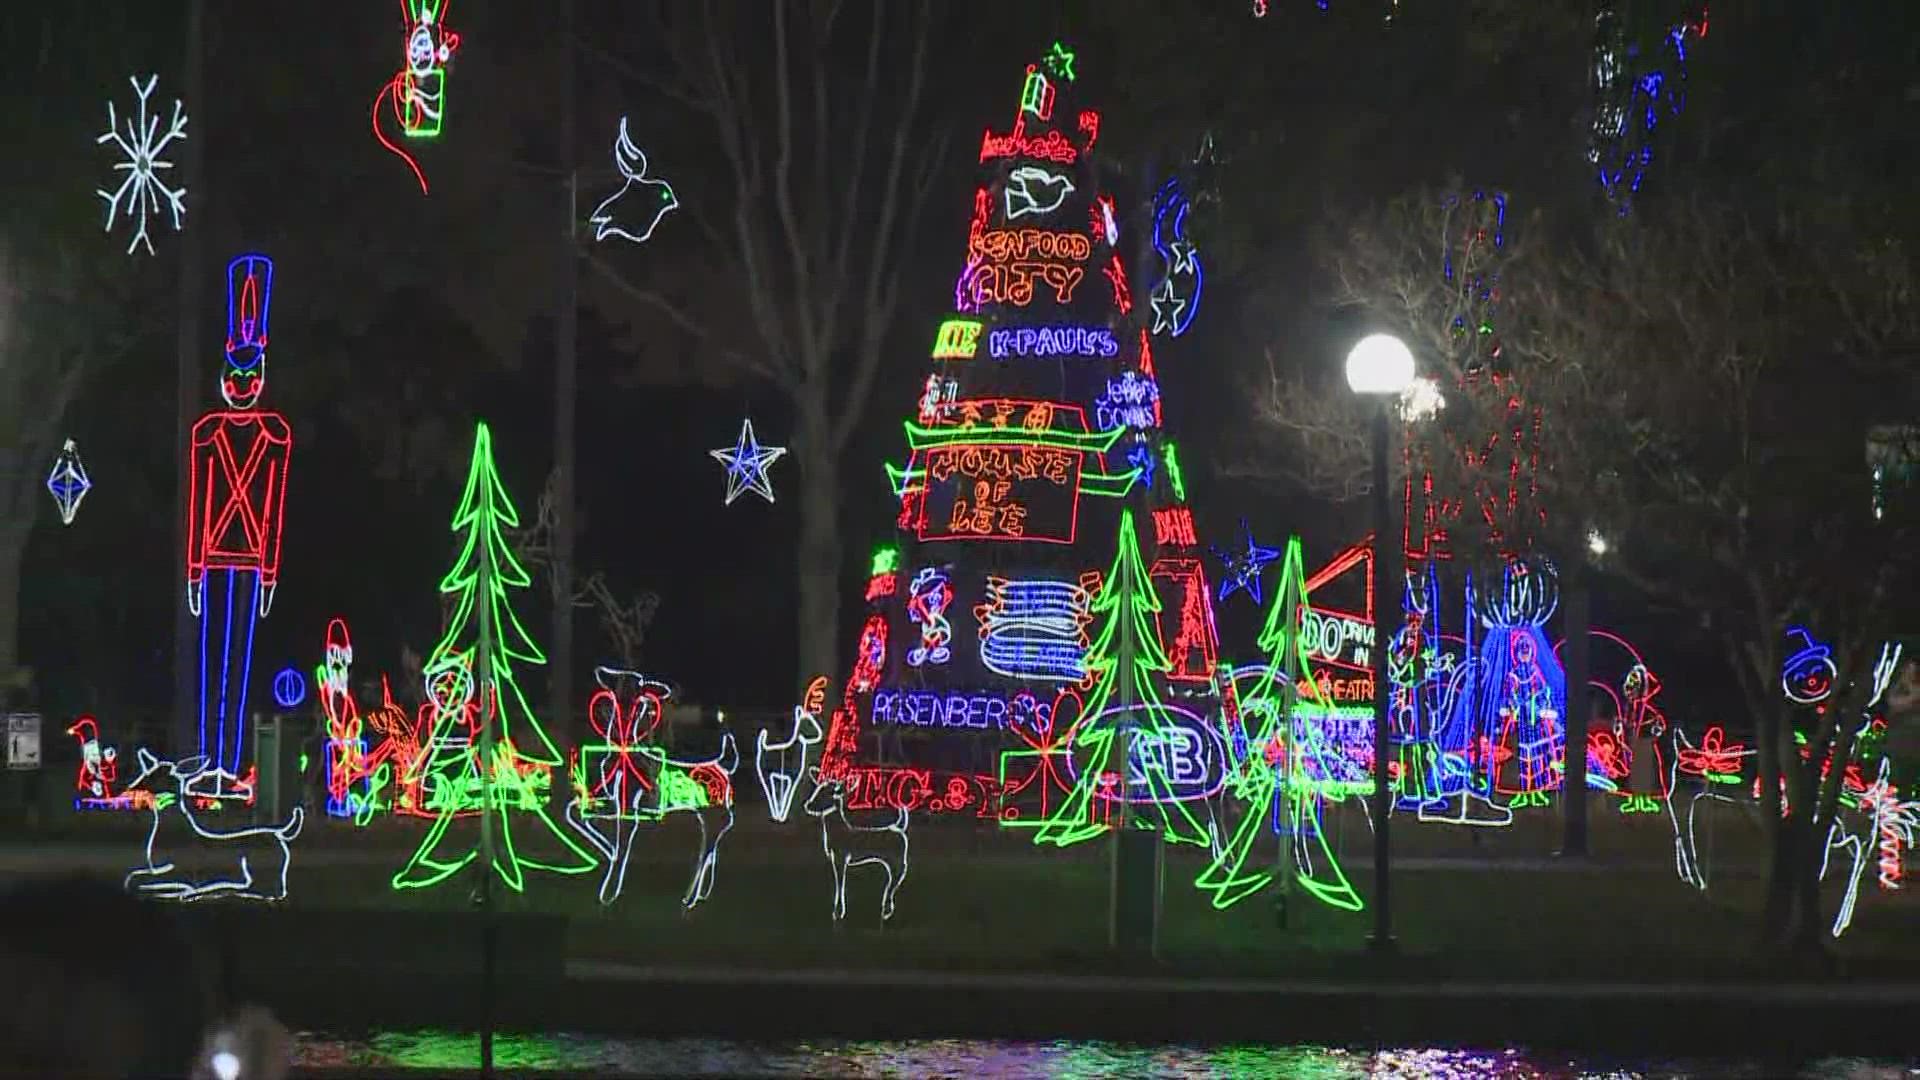 WWL-TV is a proud sponsor of the 36th annual Christmas in the Park.